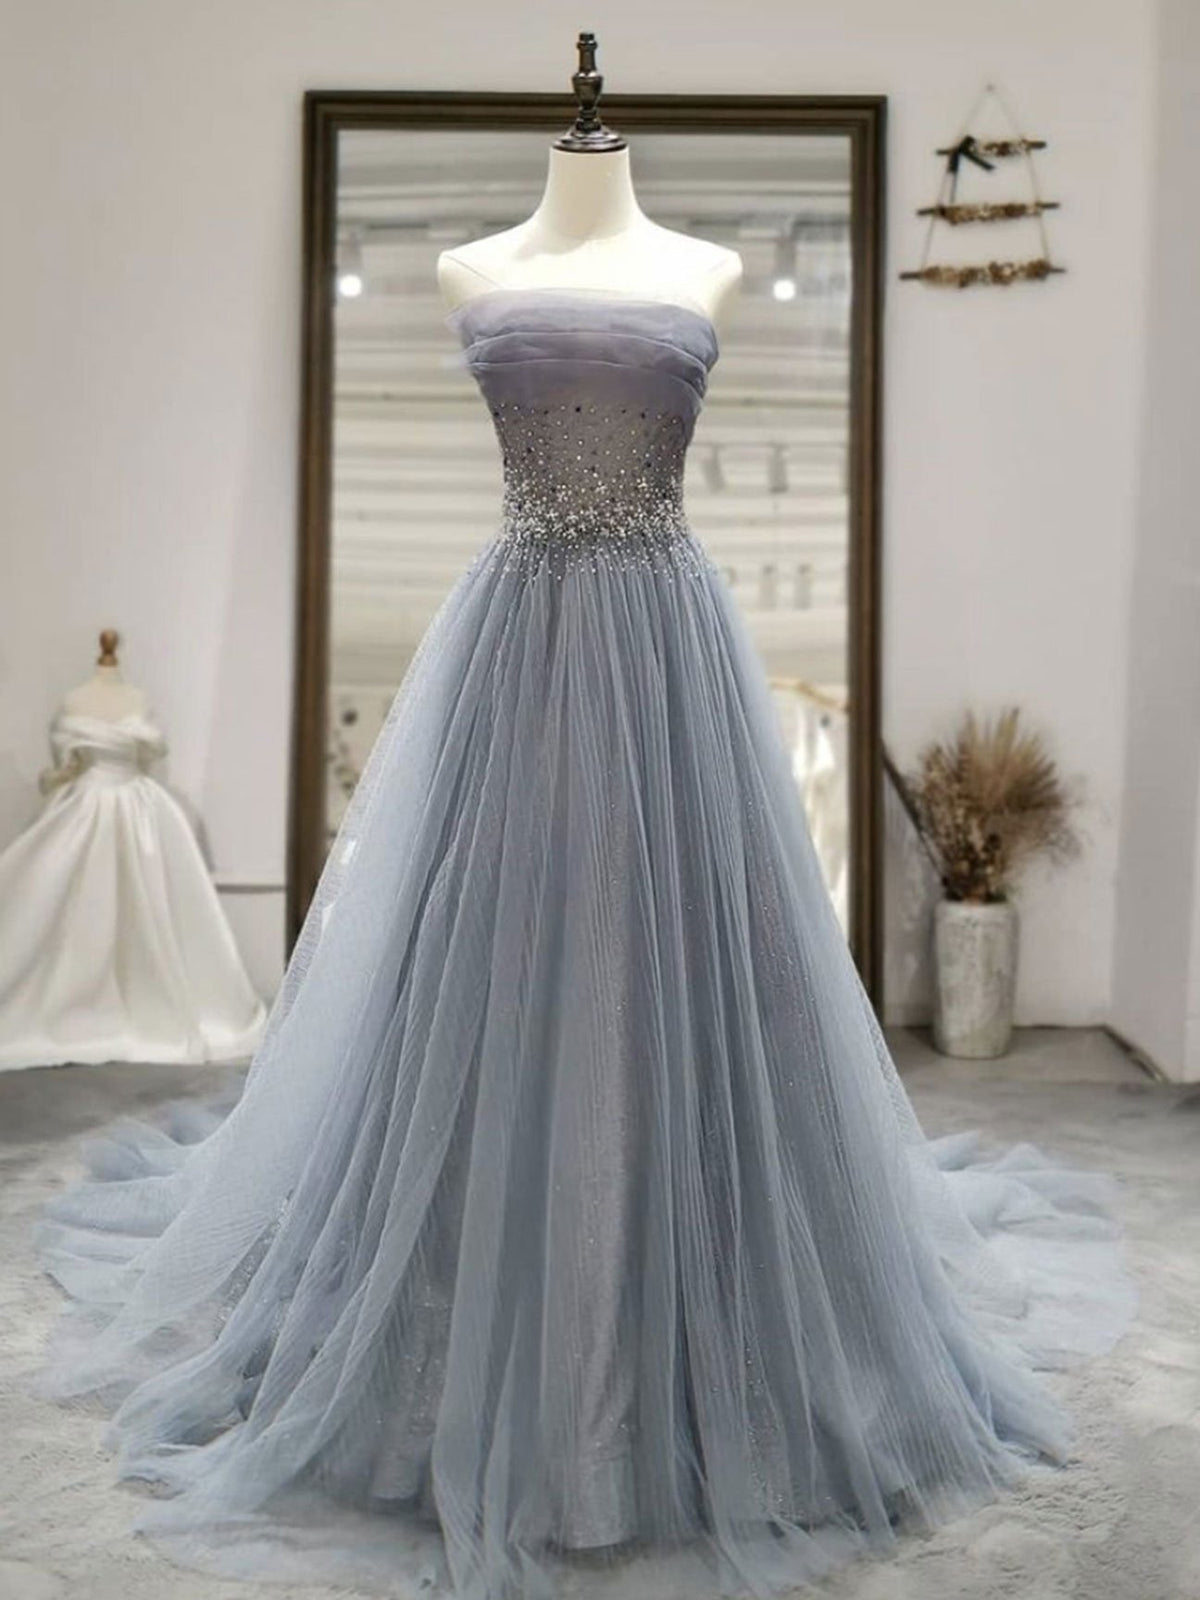 Party Dress New, Strapless Gray Tulle Long Prom Dresses, Strapless Gray Long Formal Evening Dresses